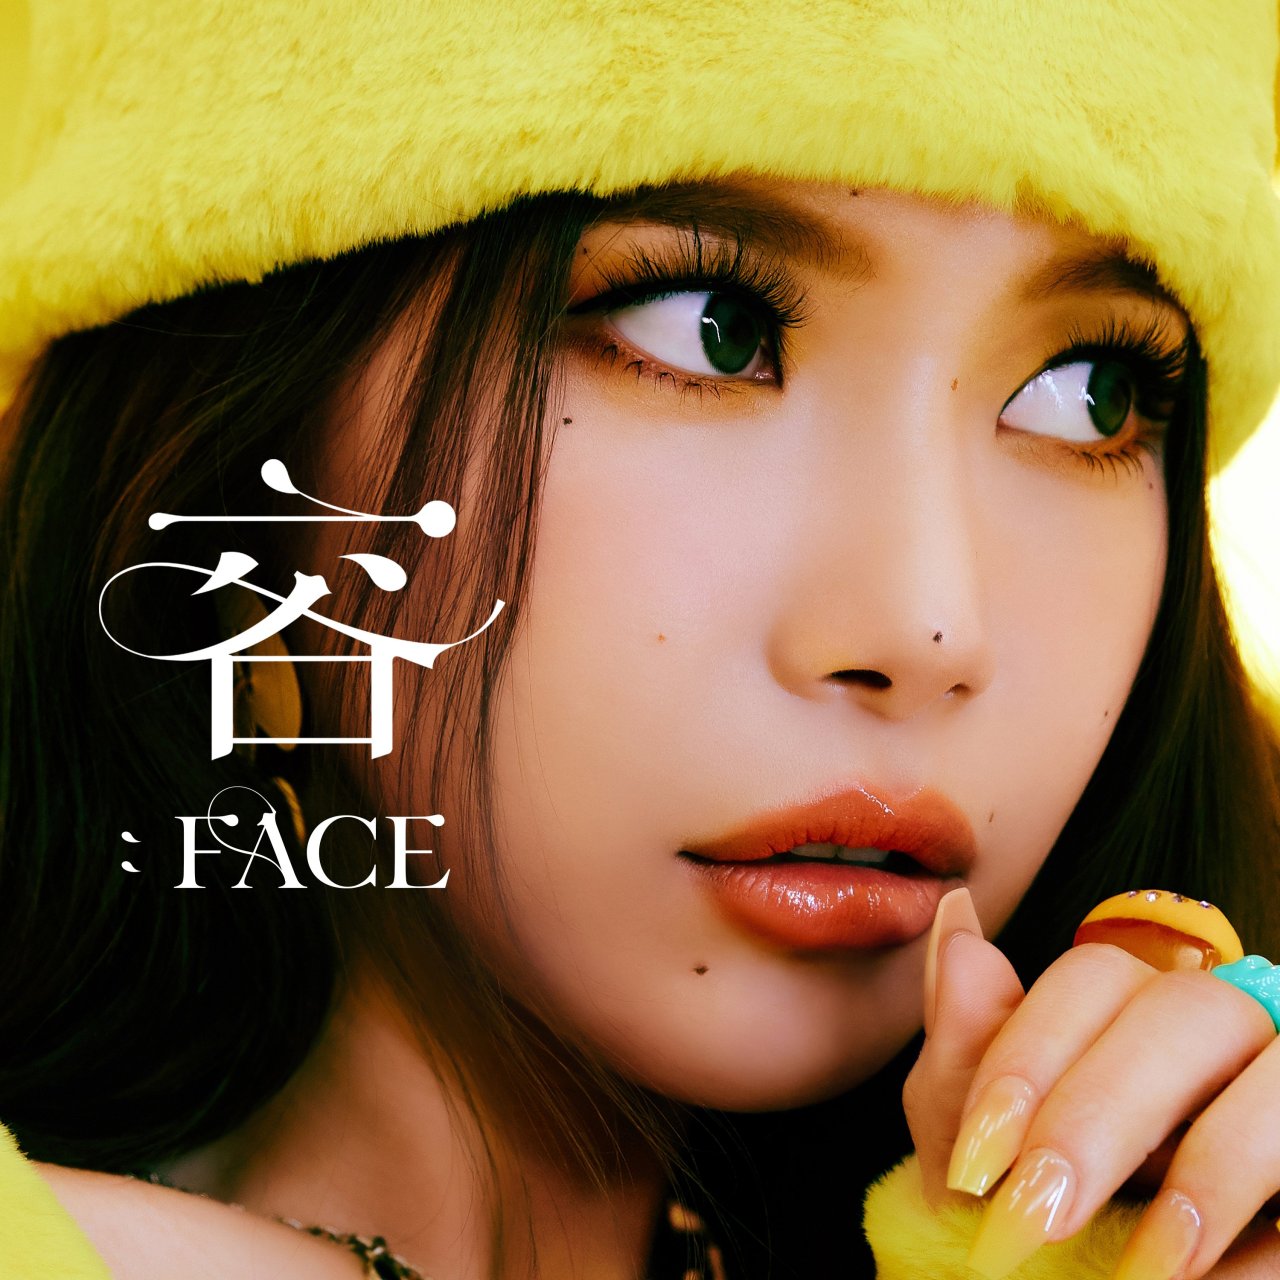 Cover image for Solar’s EP “Face” (RBW)